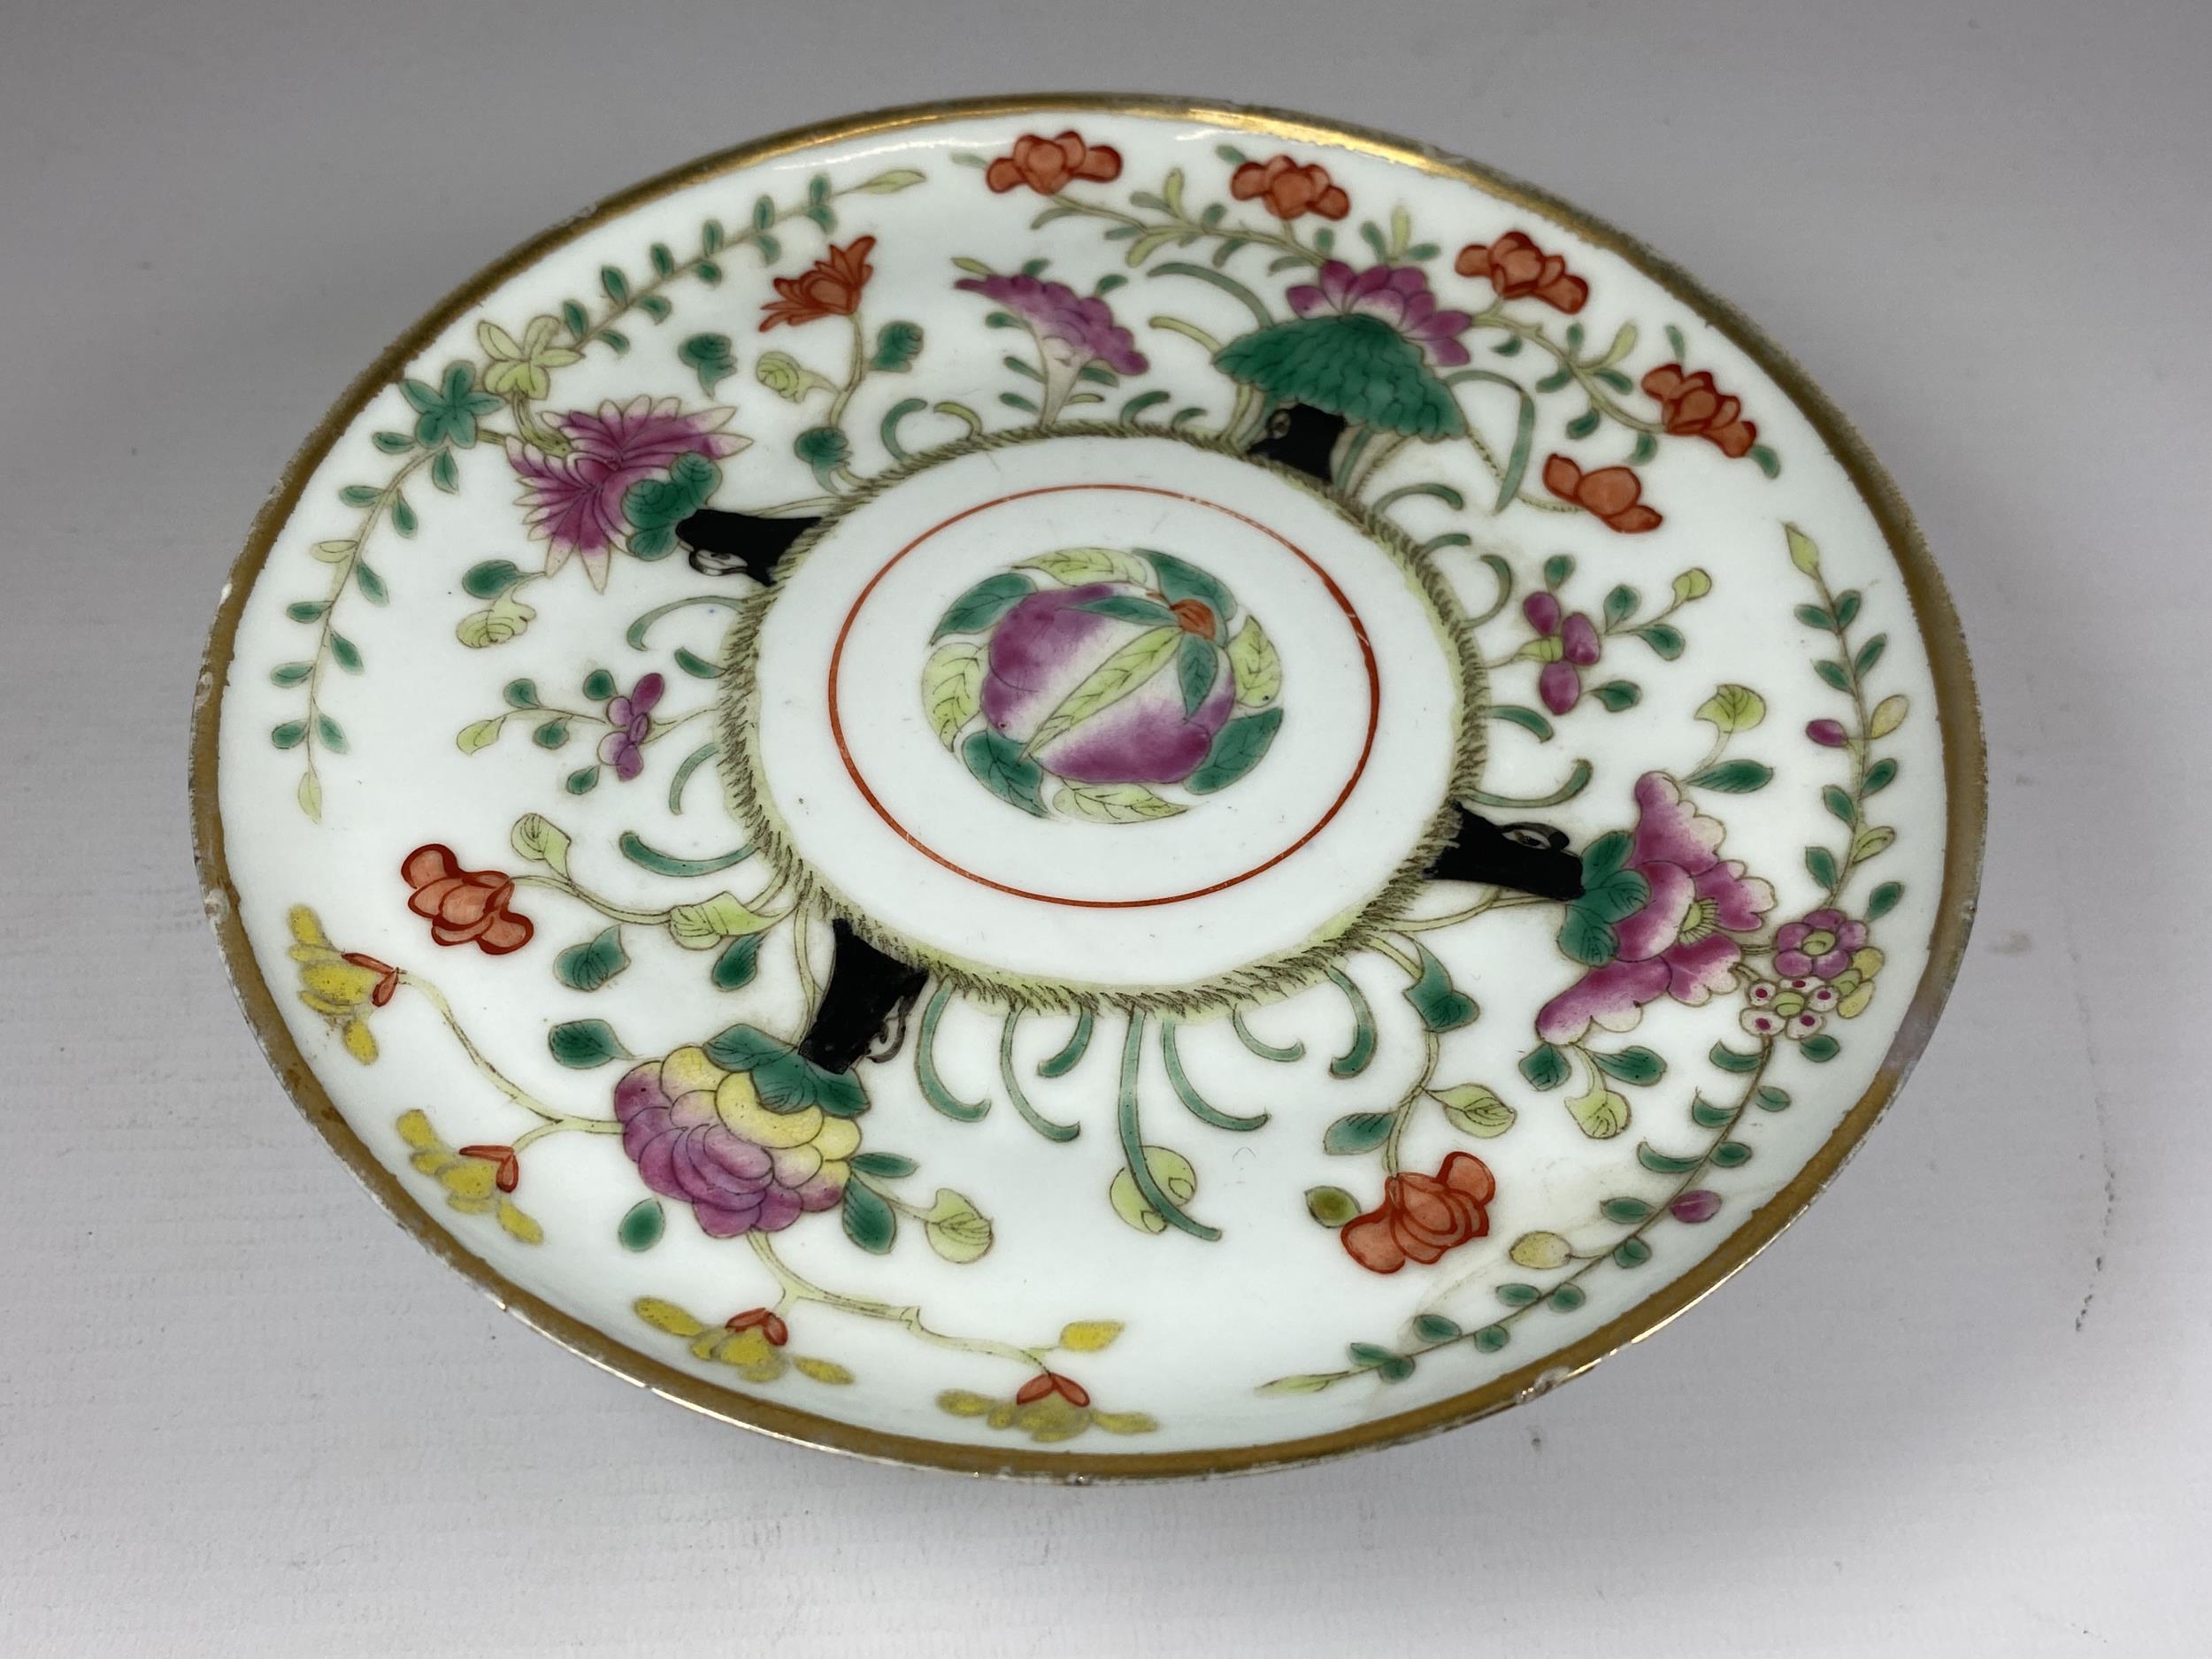 A CHINESE QING PORCELAIN TAZZA / PEDESTAL STAND WITH ENAMELLED FLORAL DESIGN, DIAMETER 18CM (A/F) - Image 2 of 8